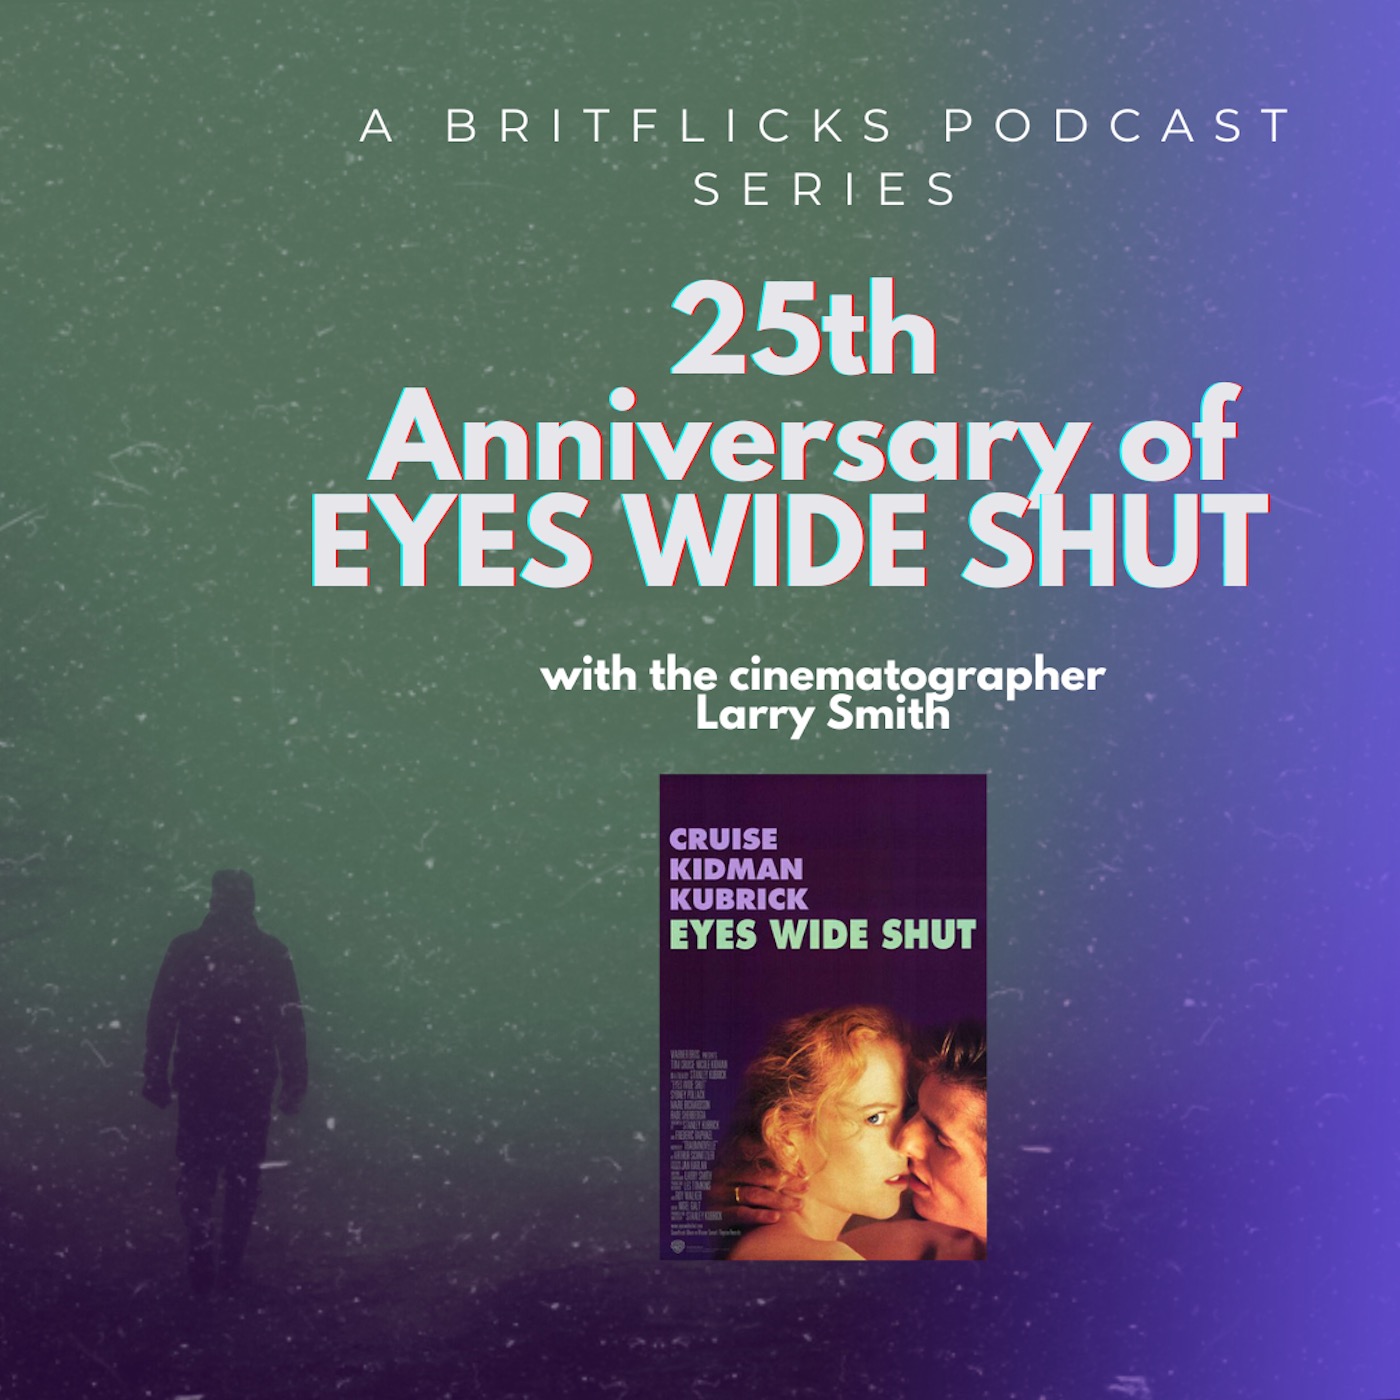 25th Anniversary of EYES WIDE SHUT with the cinematographer Larry Smith